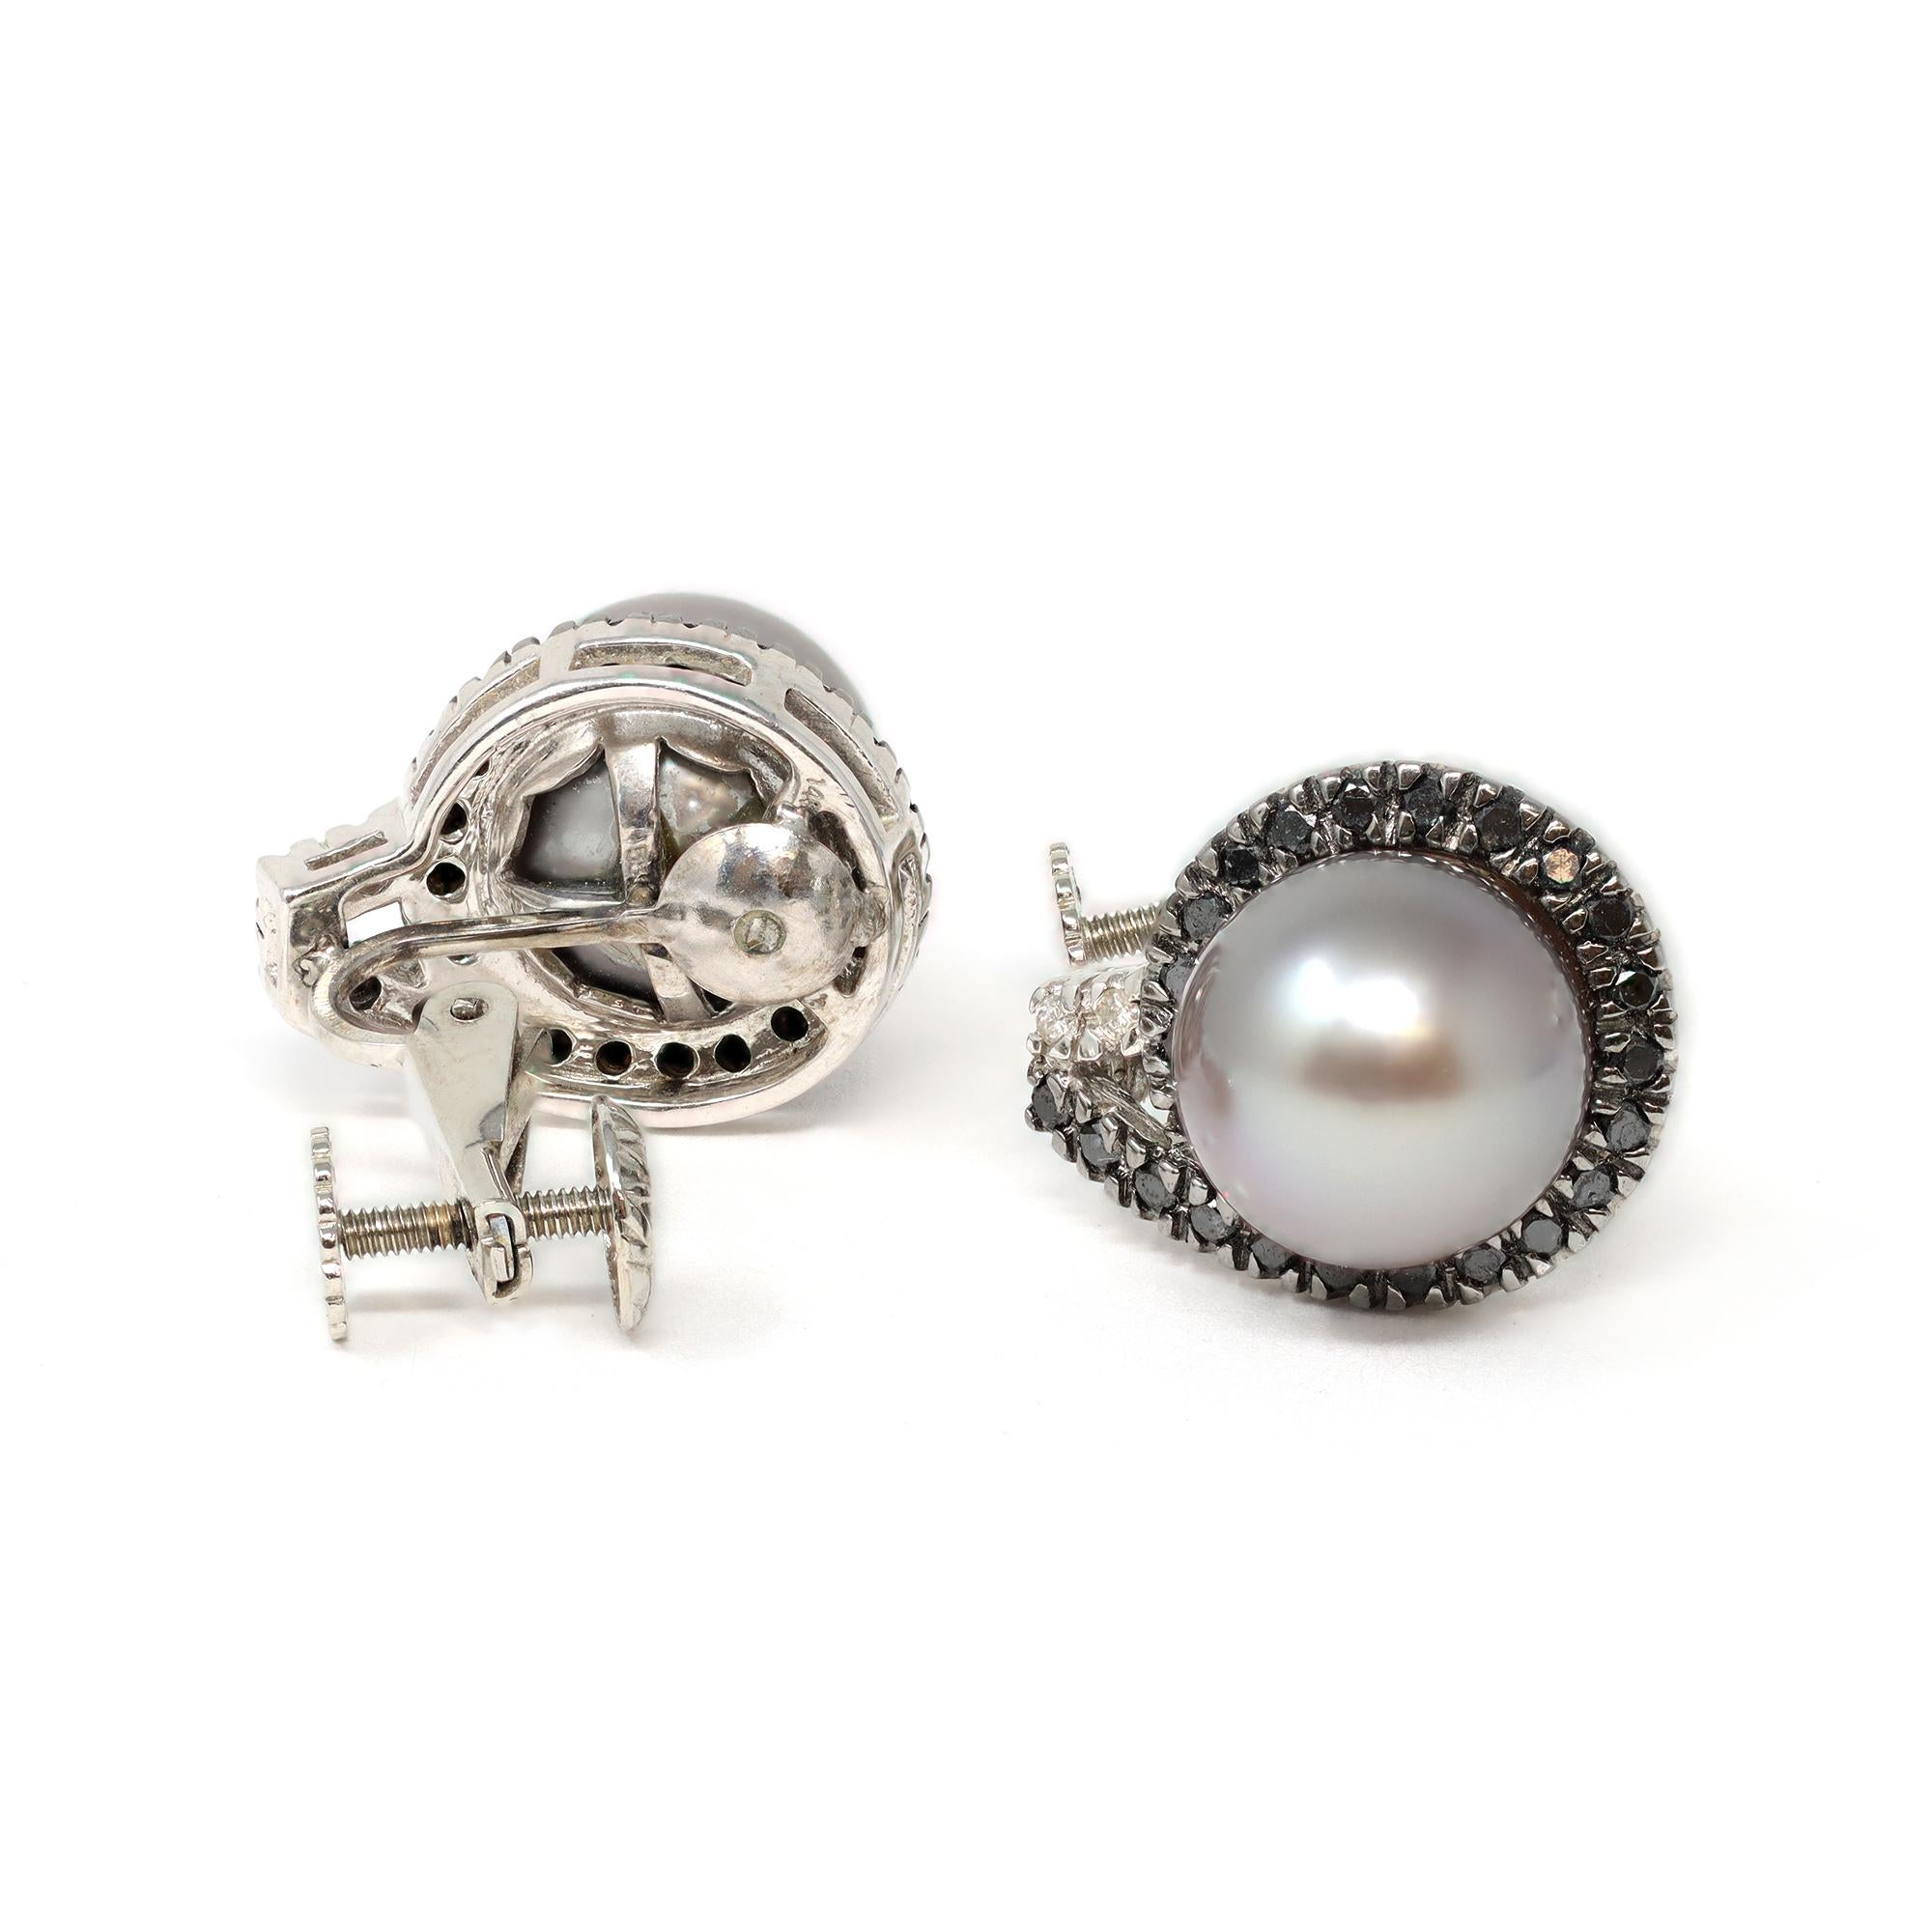 A vintage pair of light grey Tahitian pearl earrings accented by a halo of black diamonds and accent white diamonds. The clip-on earrings circa 1980-90 are set in 14-karat white gold. They have posts and omega-backs. The estimated weight of the